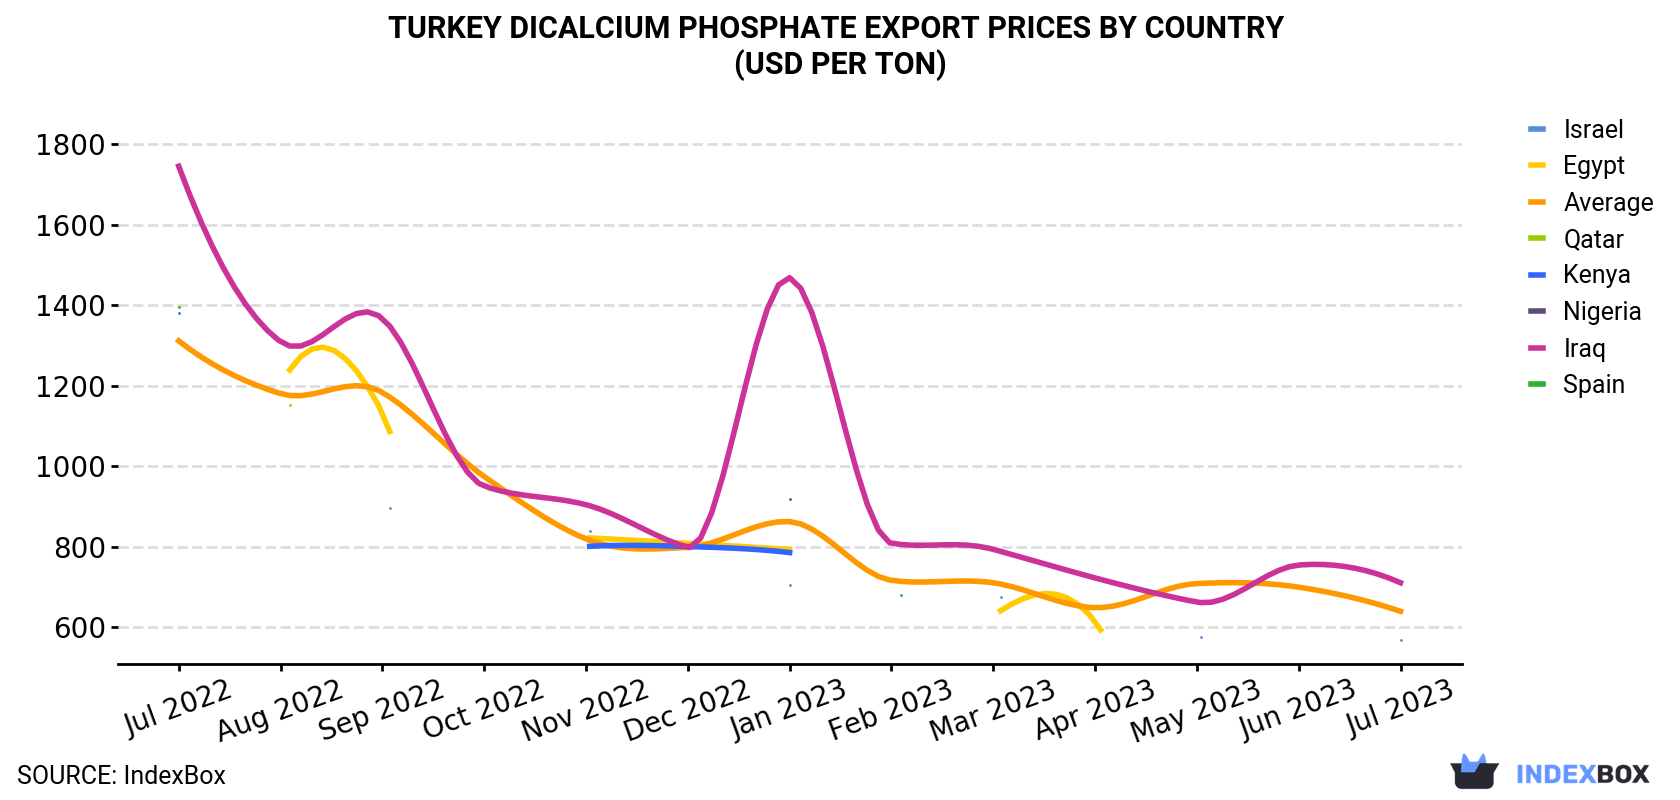 Turkey Dicalcium Phosphate Export Prices By Country (USD Per Ton)